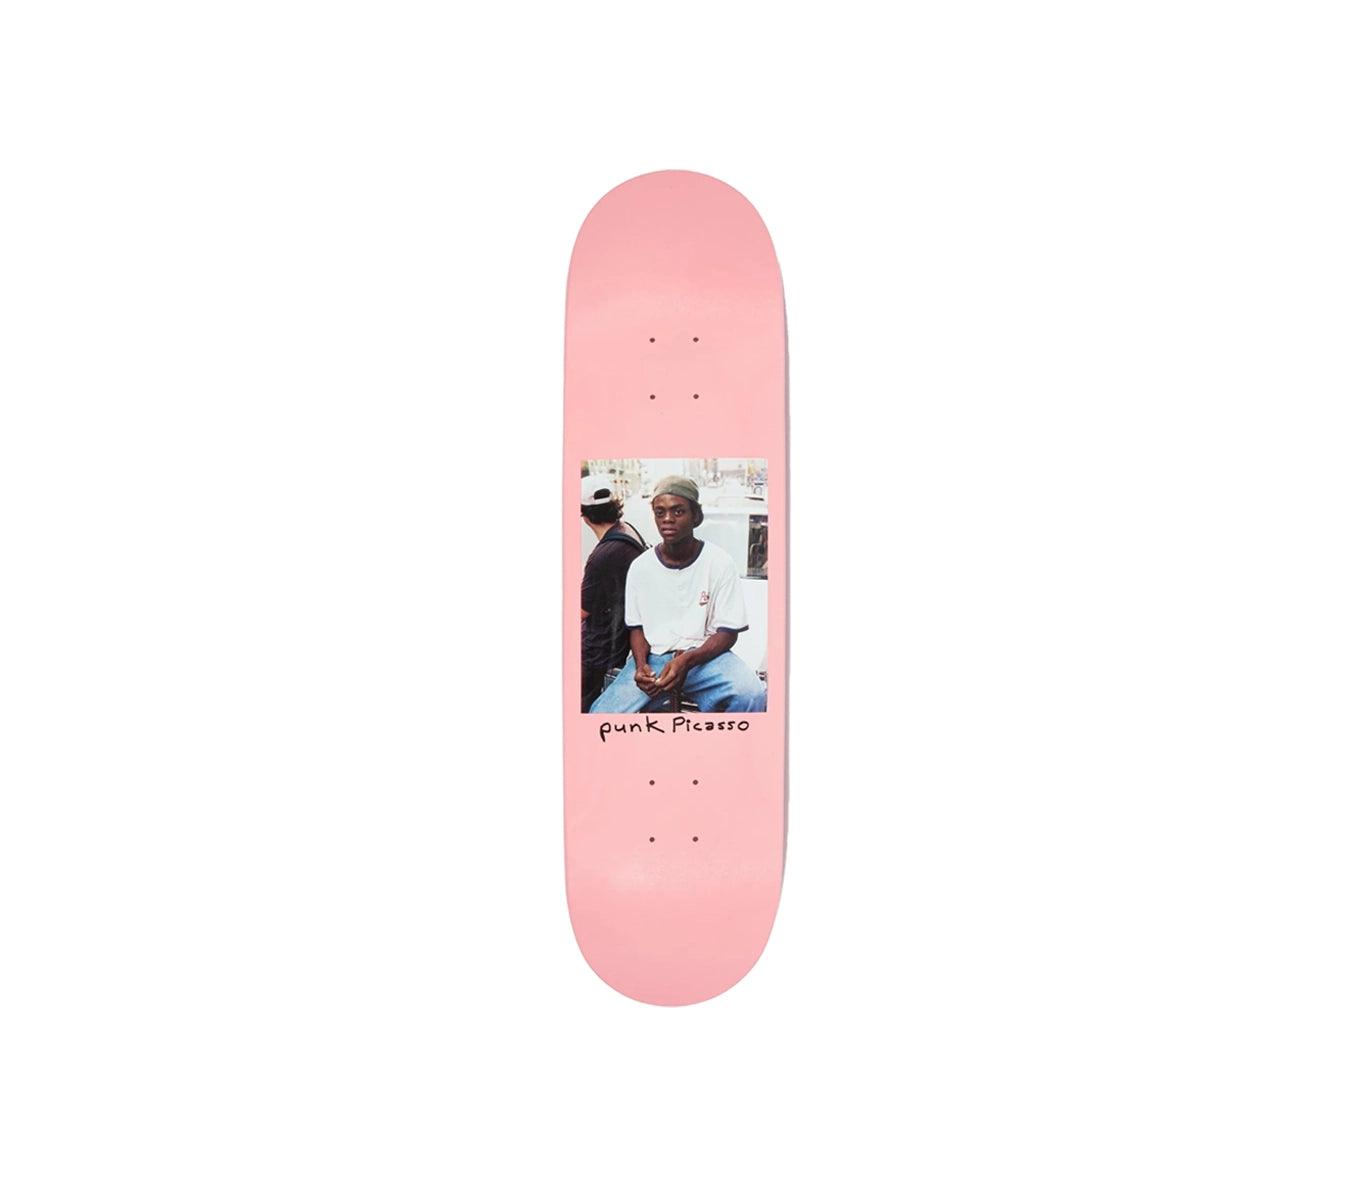 Wasted Paris Riot Board - Sour Pink - SUPERCONSCIOUS BERLIN